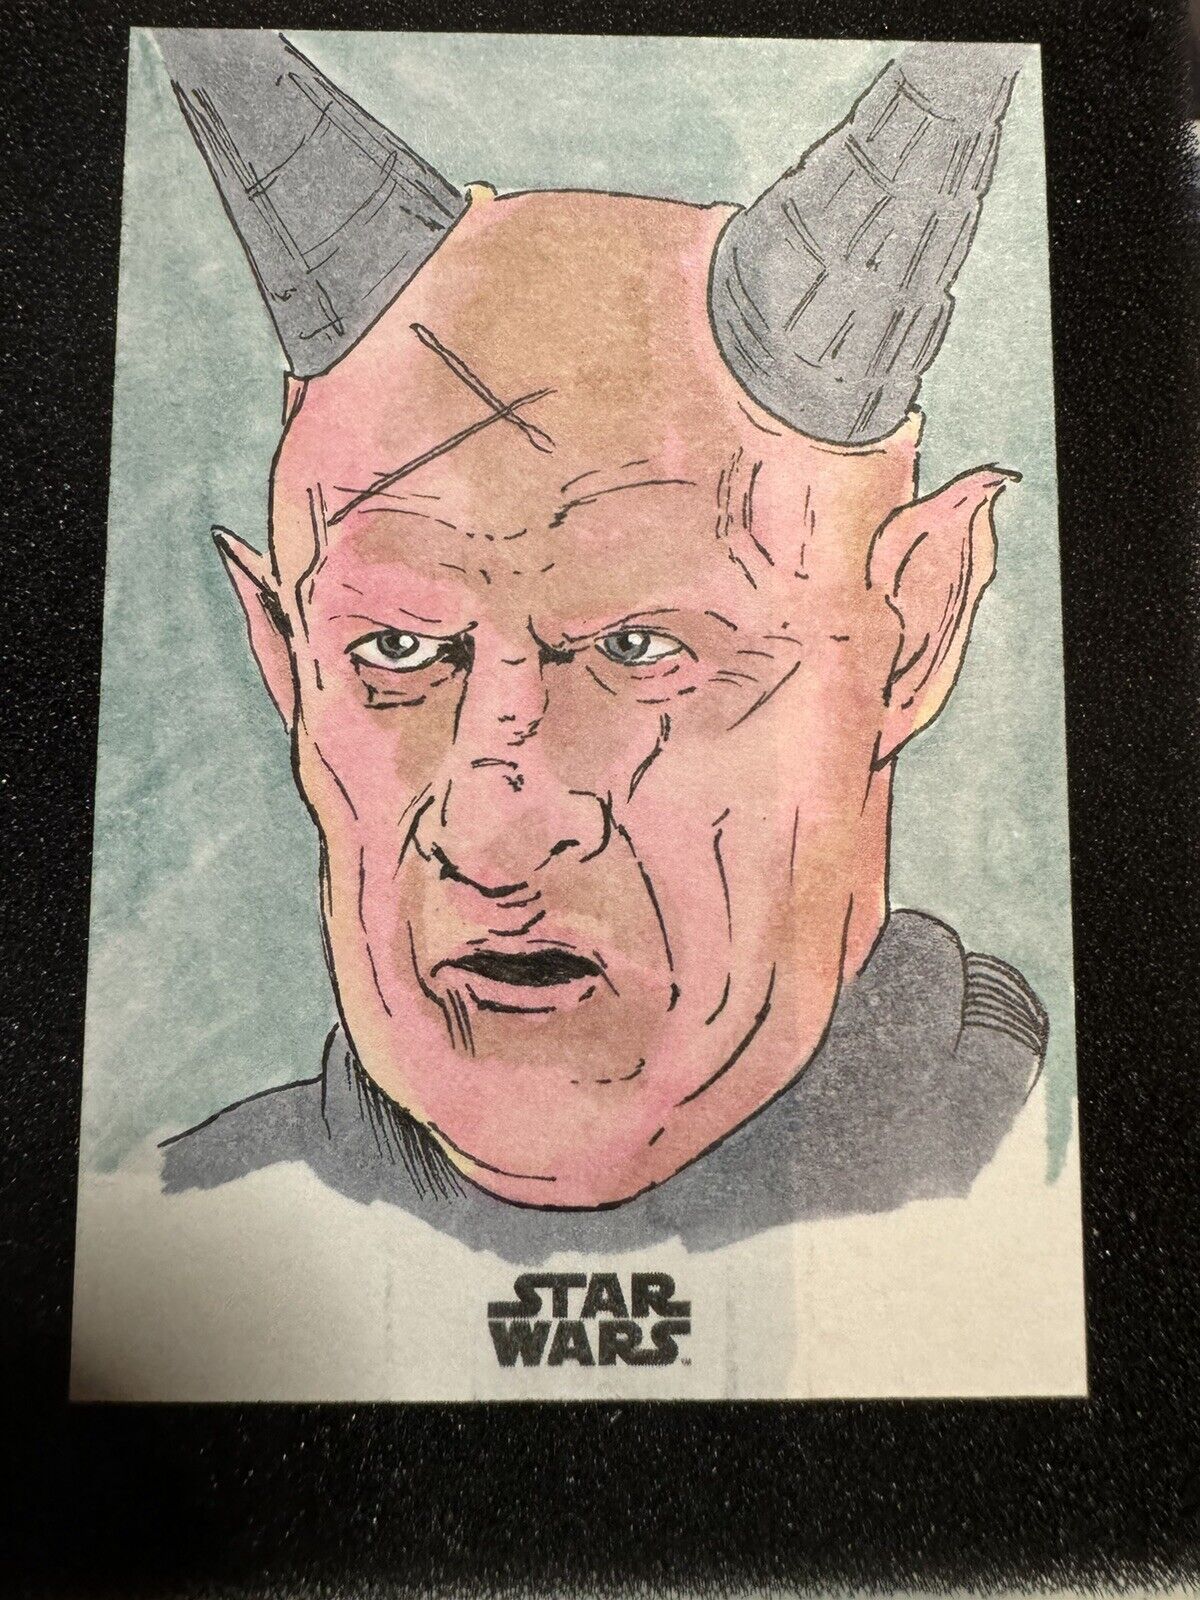 2022 Topps Star Wars Sketch Card Chris Colter 1/1